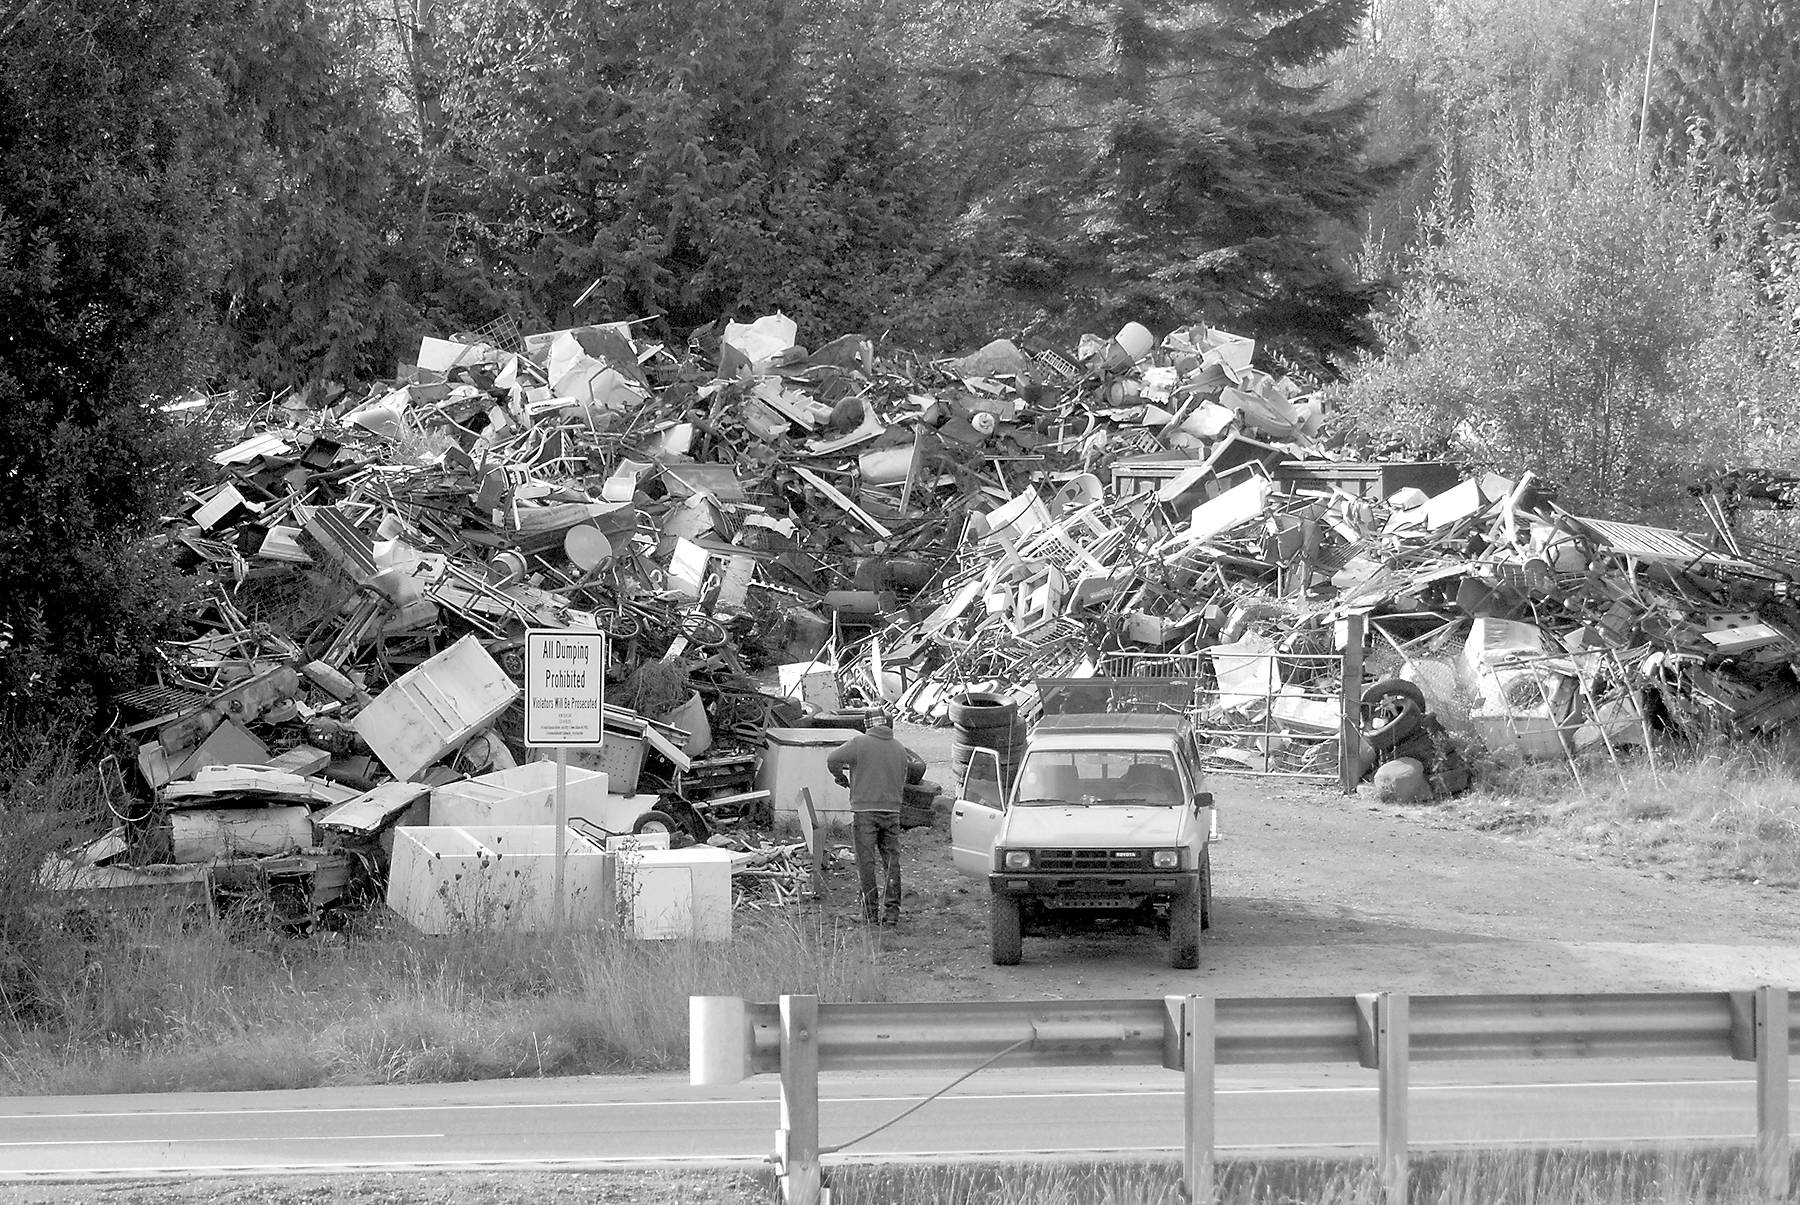 Keith Thorpe/Peninsula Daily NewsMidway Metals, 258010 U.S. Highway 101 east of Port Angeles, shown on Thursday, is under scrutiny for being in violation of county solid waste standards.